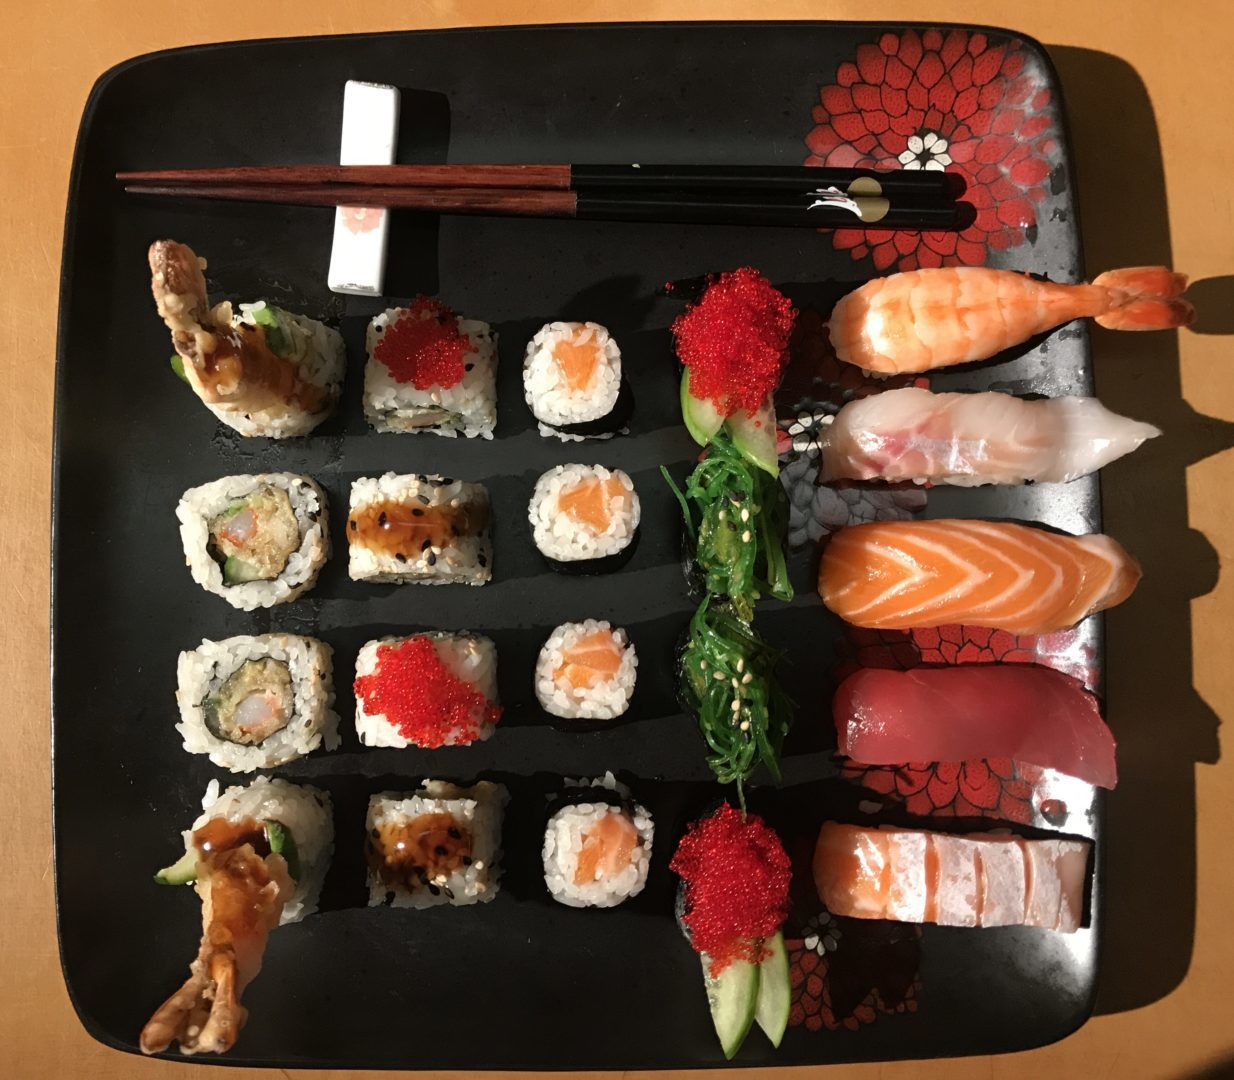 An assortment of sushi and rolls